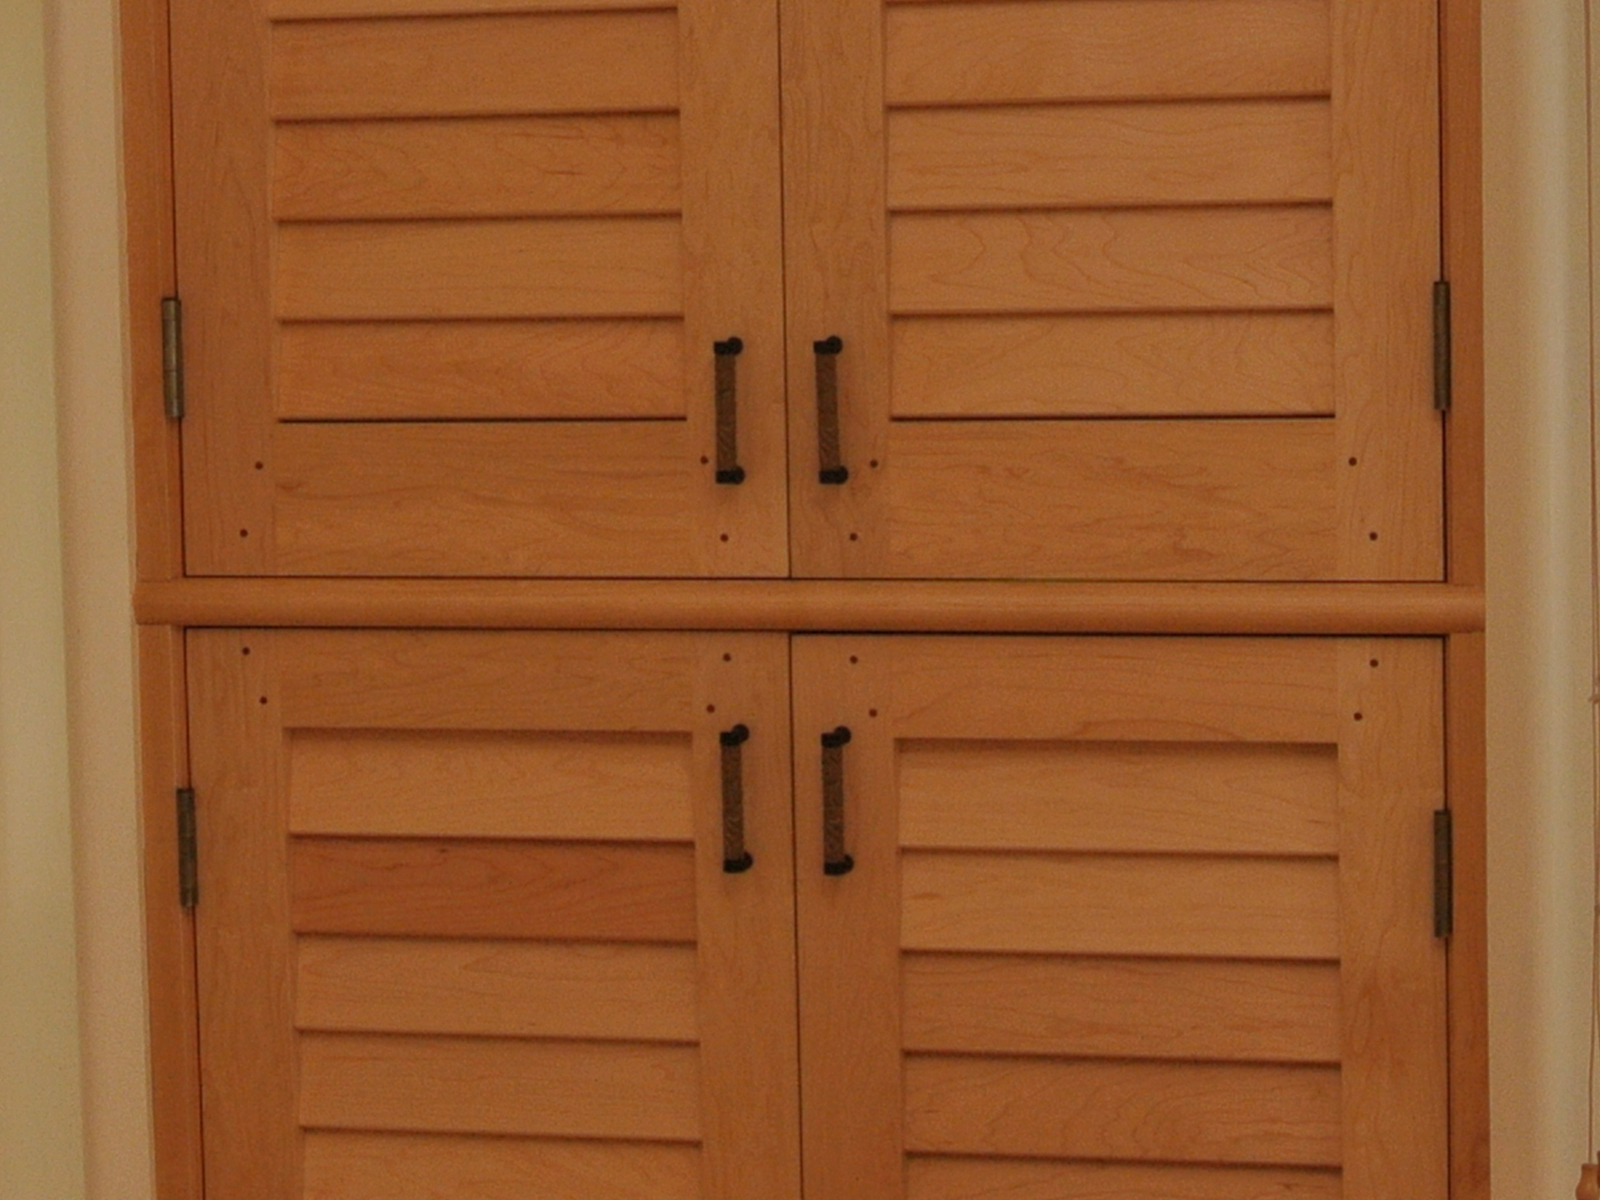 pegs on shutters and doors